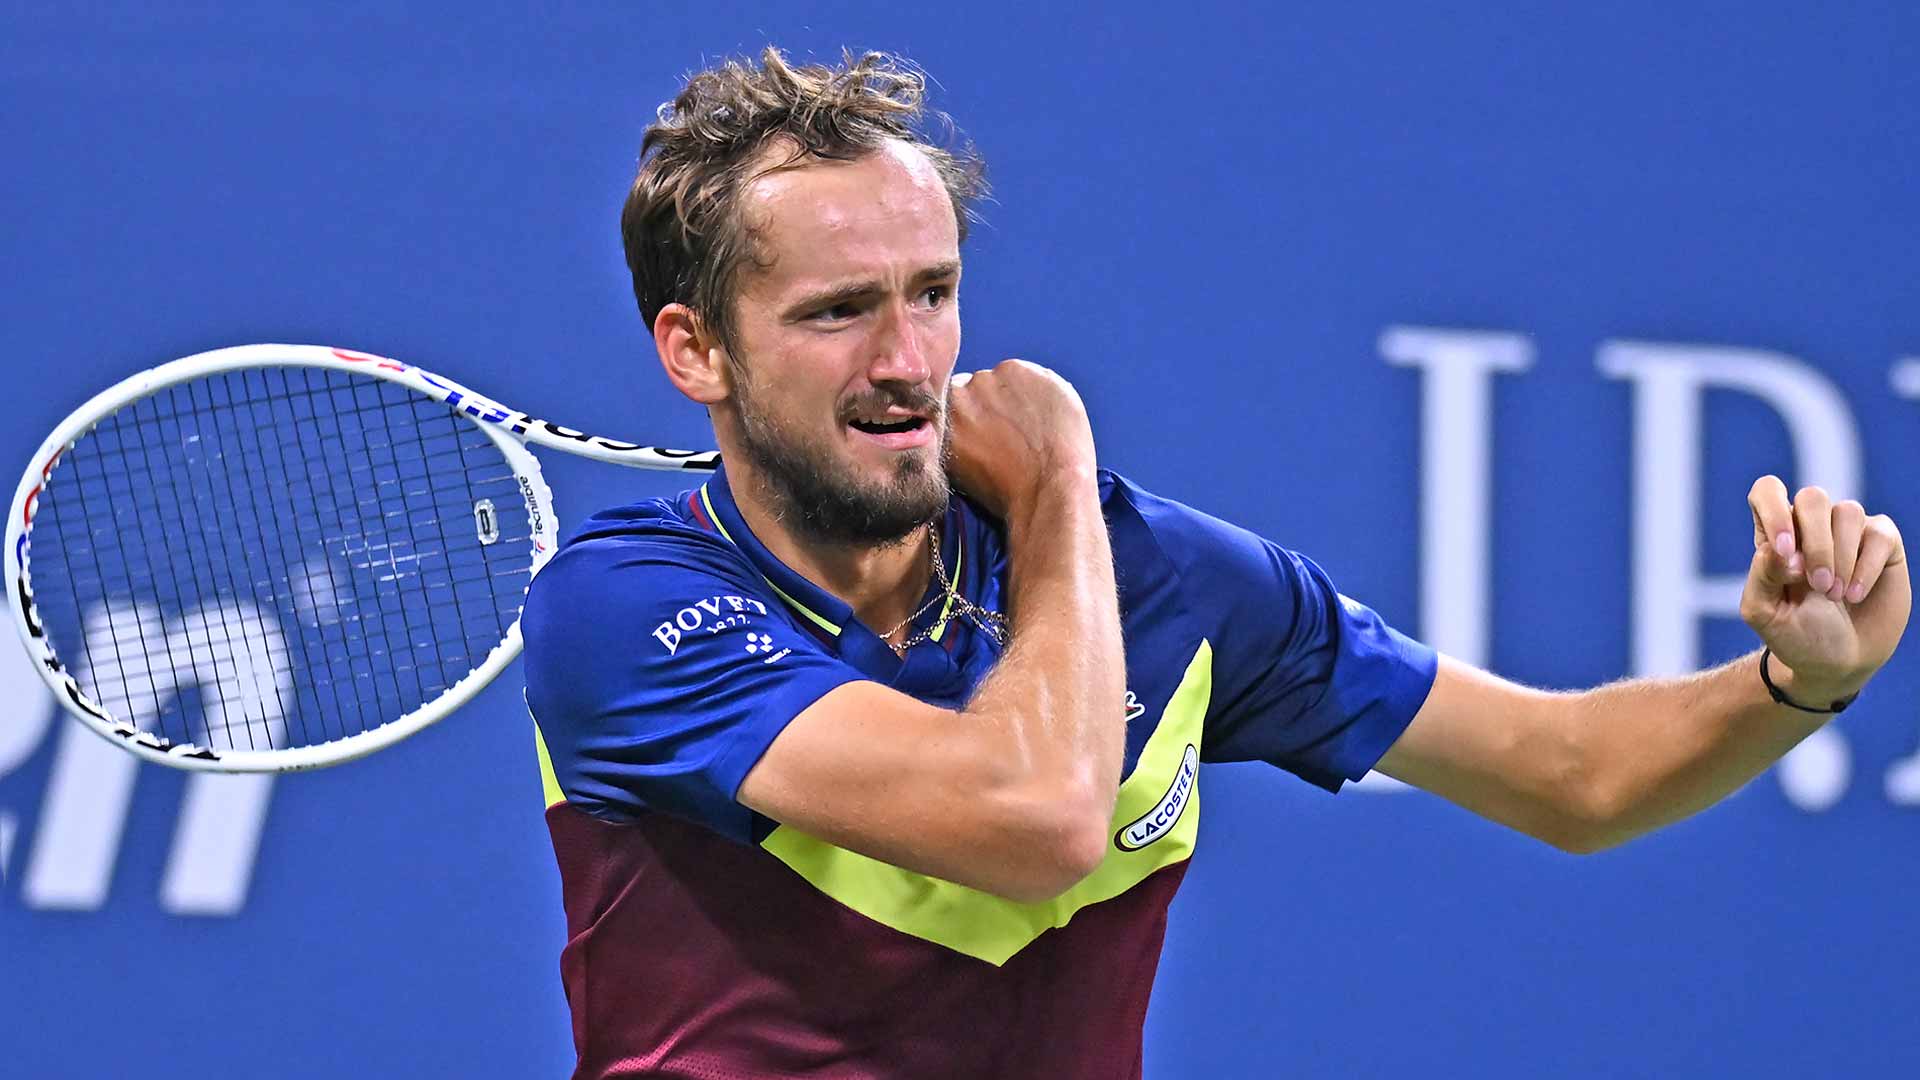 Daniil Medvedev is chasing his sixth tour-level title of the season in Sunday's US Open championship match.